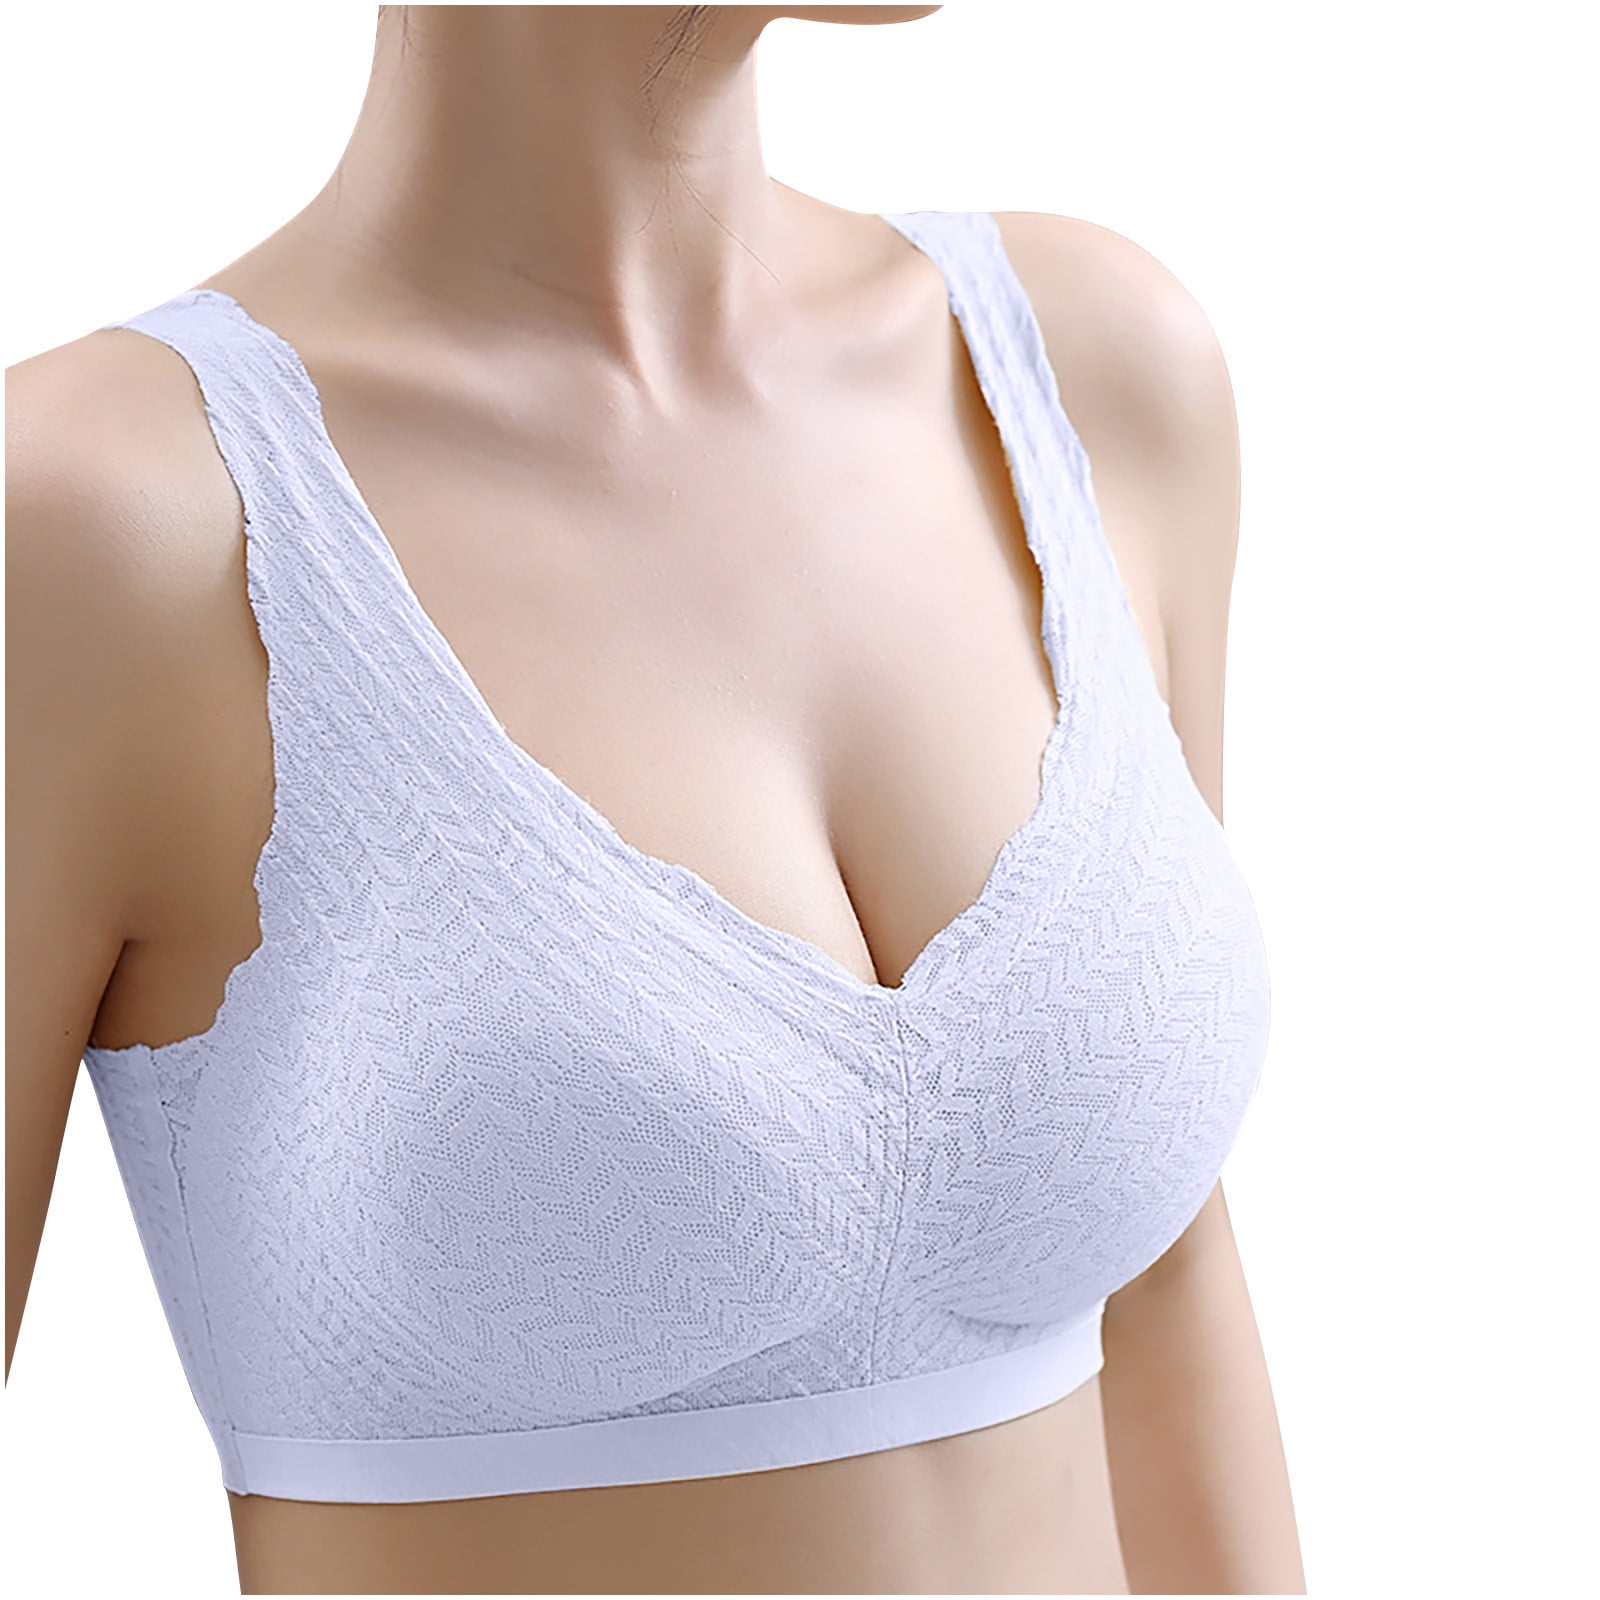 Padded underwired lace bra - Light blue - Ladies